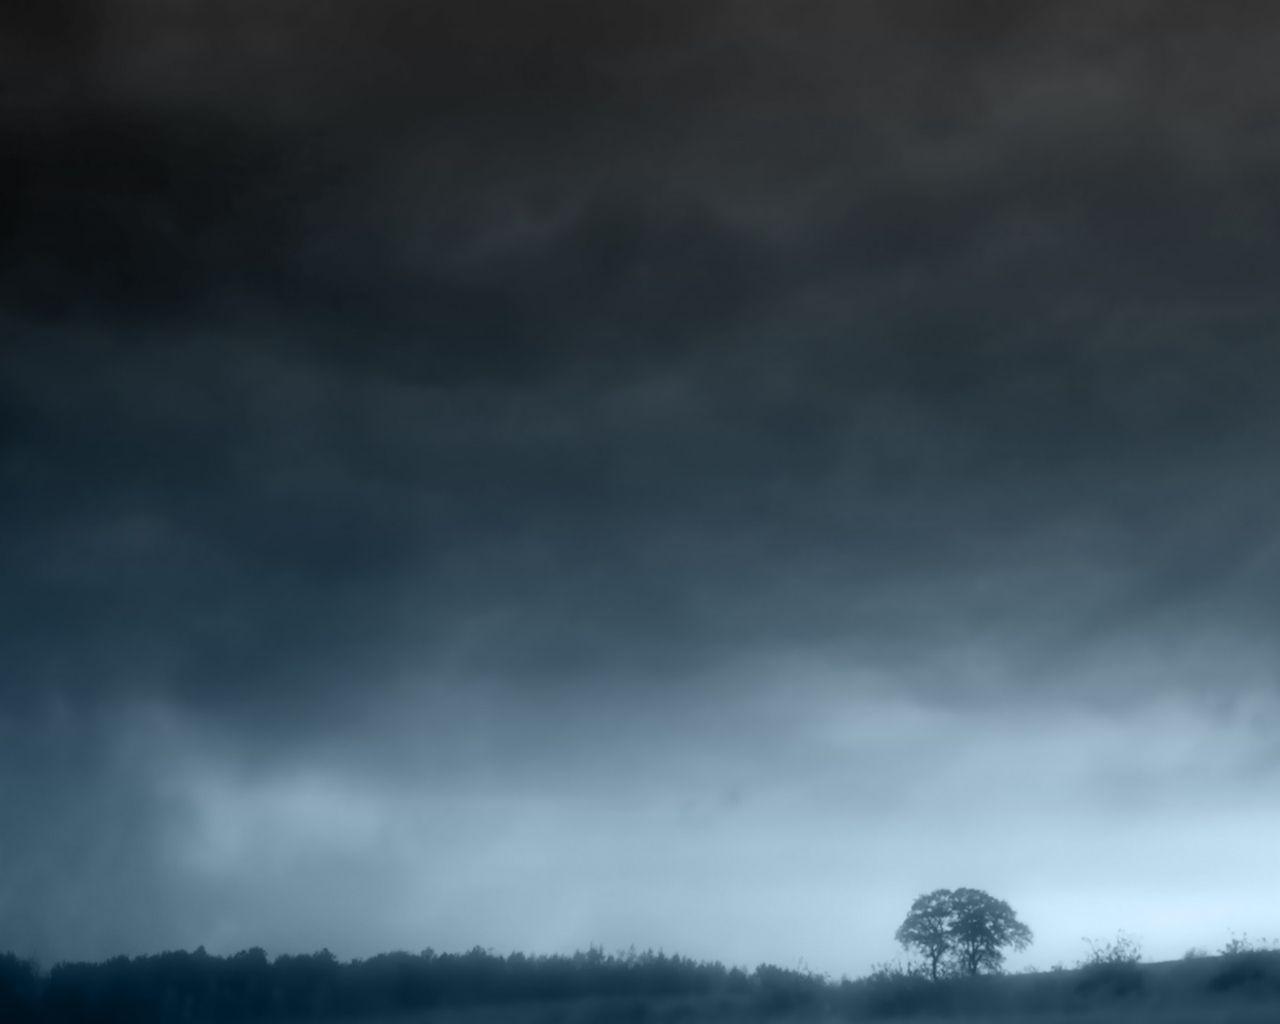 Gathering storm wallpaper from Other wallpaper